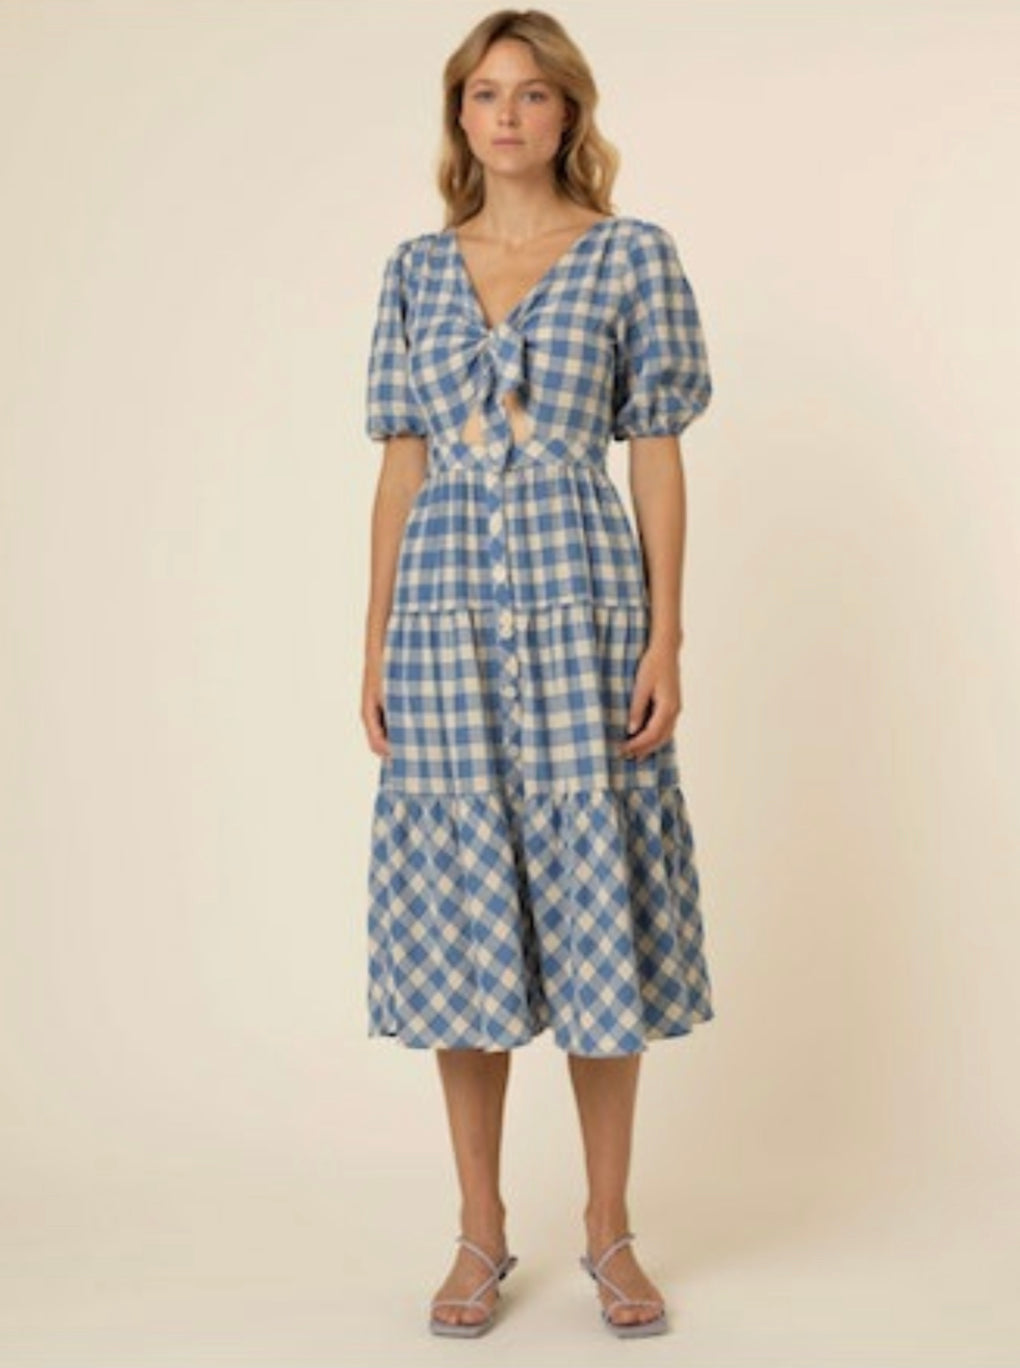 FRNCH-VICTOIRE LADIES WOVEN DRESS